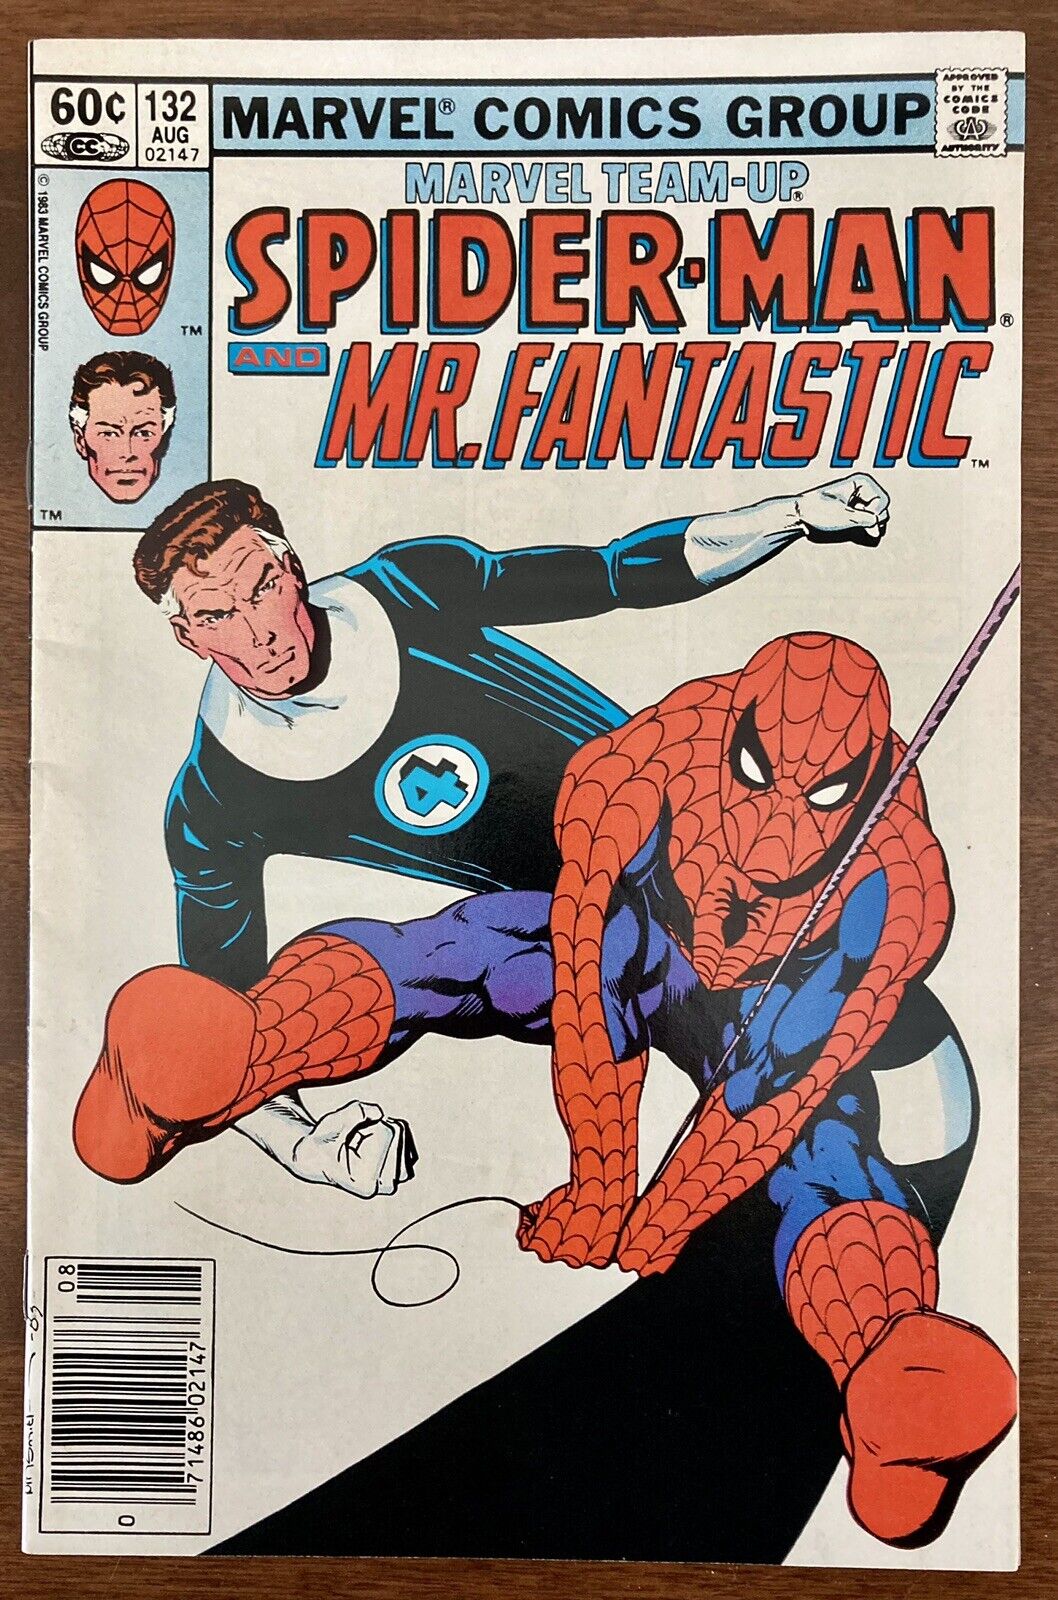 Marvel Comic Team-Up #132 SpiderMan - Mr. Fantastic  August 1983 Great Condition